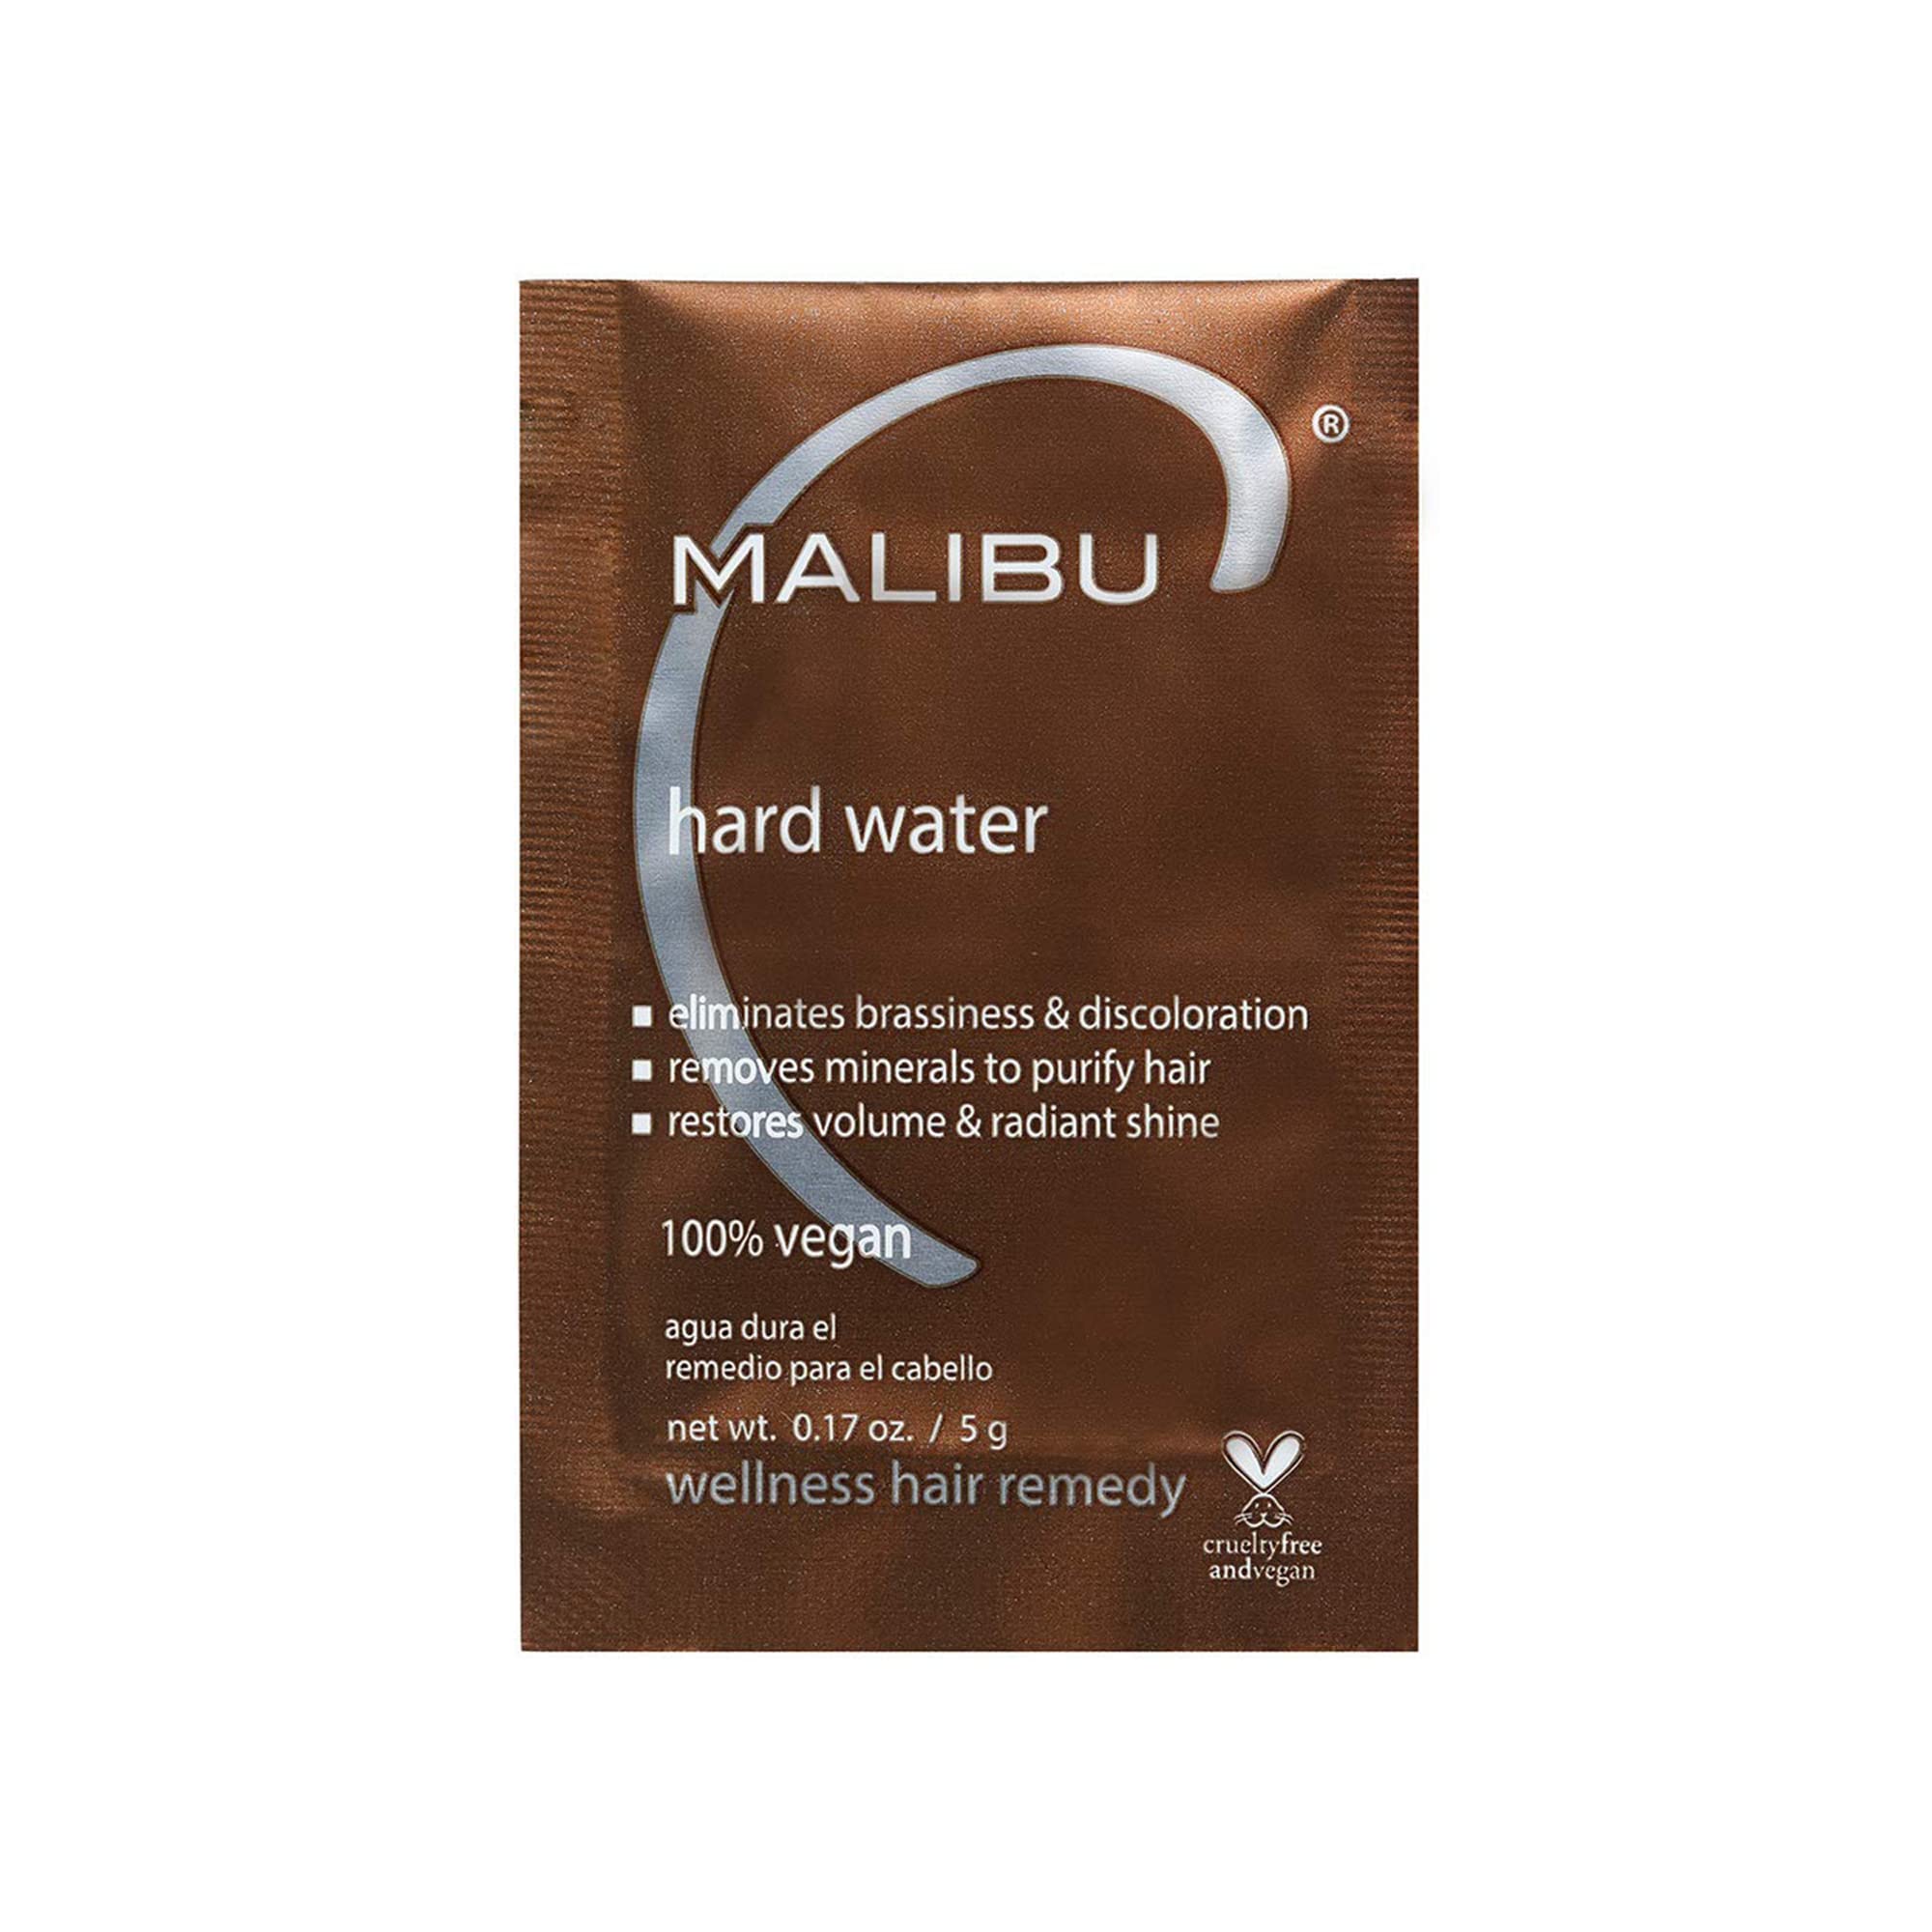 Malibu C Hard Water Wellness Hair Remedy - Removes Hard Water Deposits & Impurities from Hair - Contains Vitamin C Complex for Hair Shine + Vibrancy